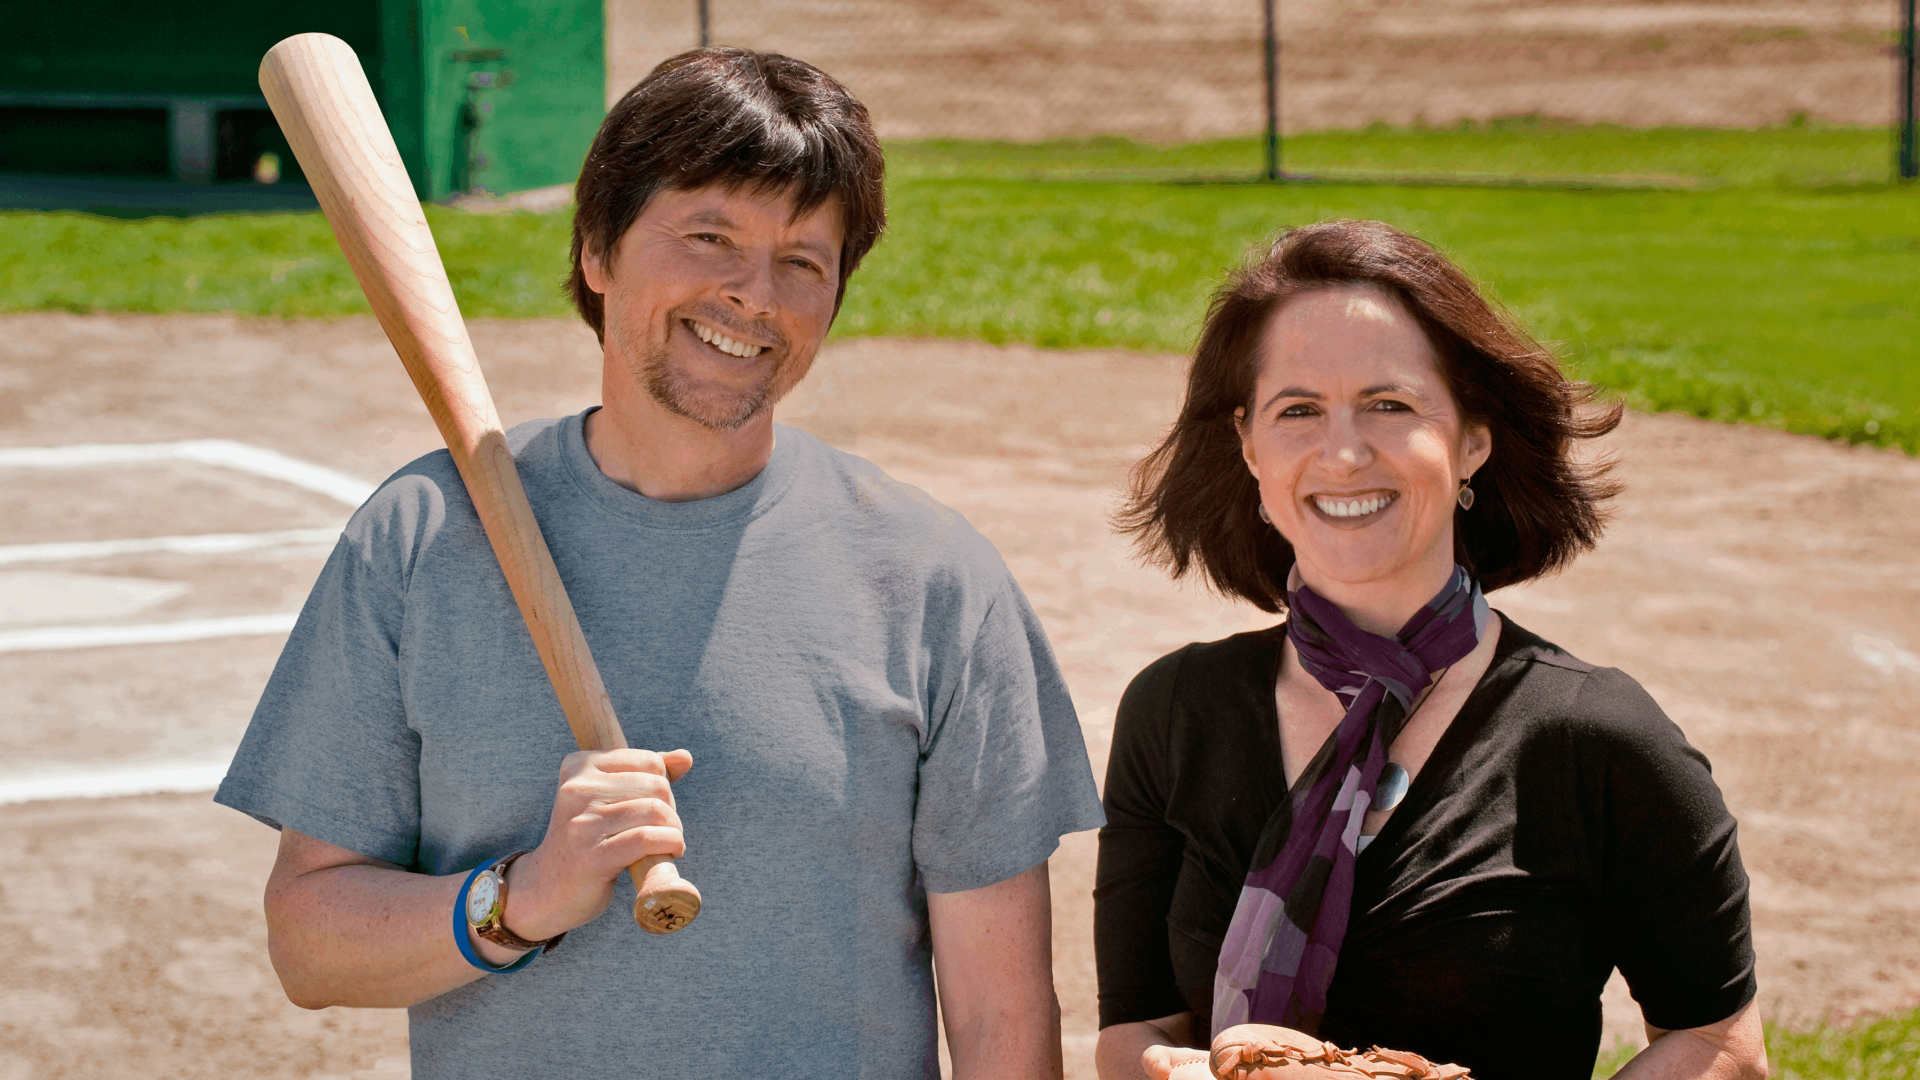 A man (left) and woman (right) standing outdoors. The man is standing casually with a wooden baseball bat.